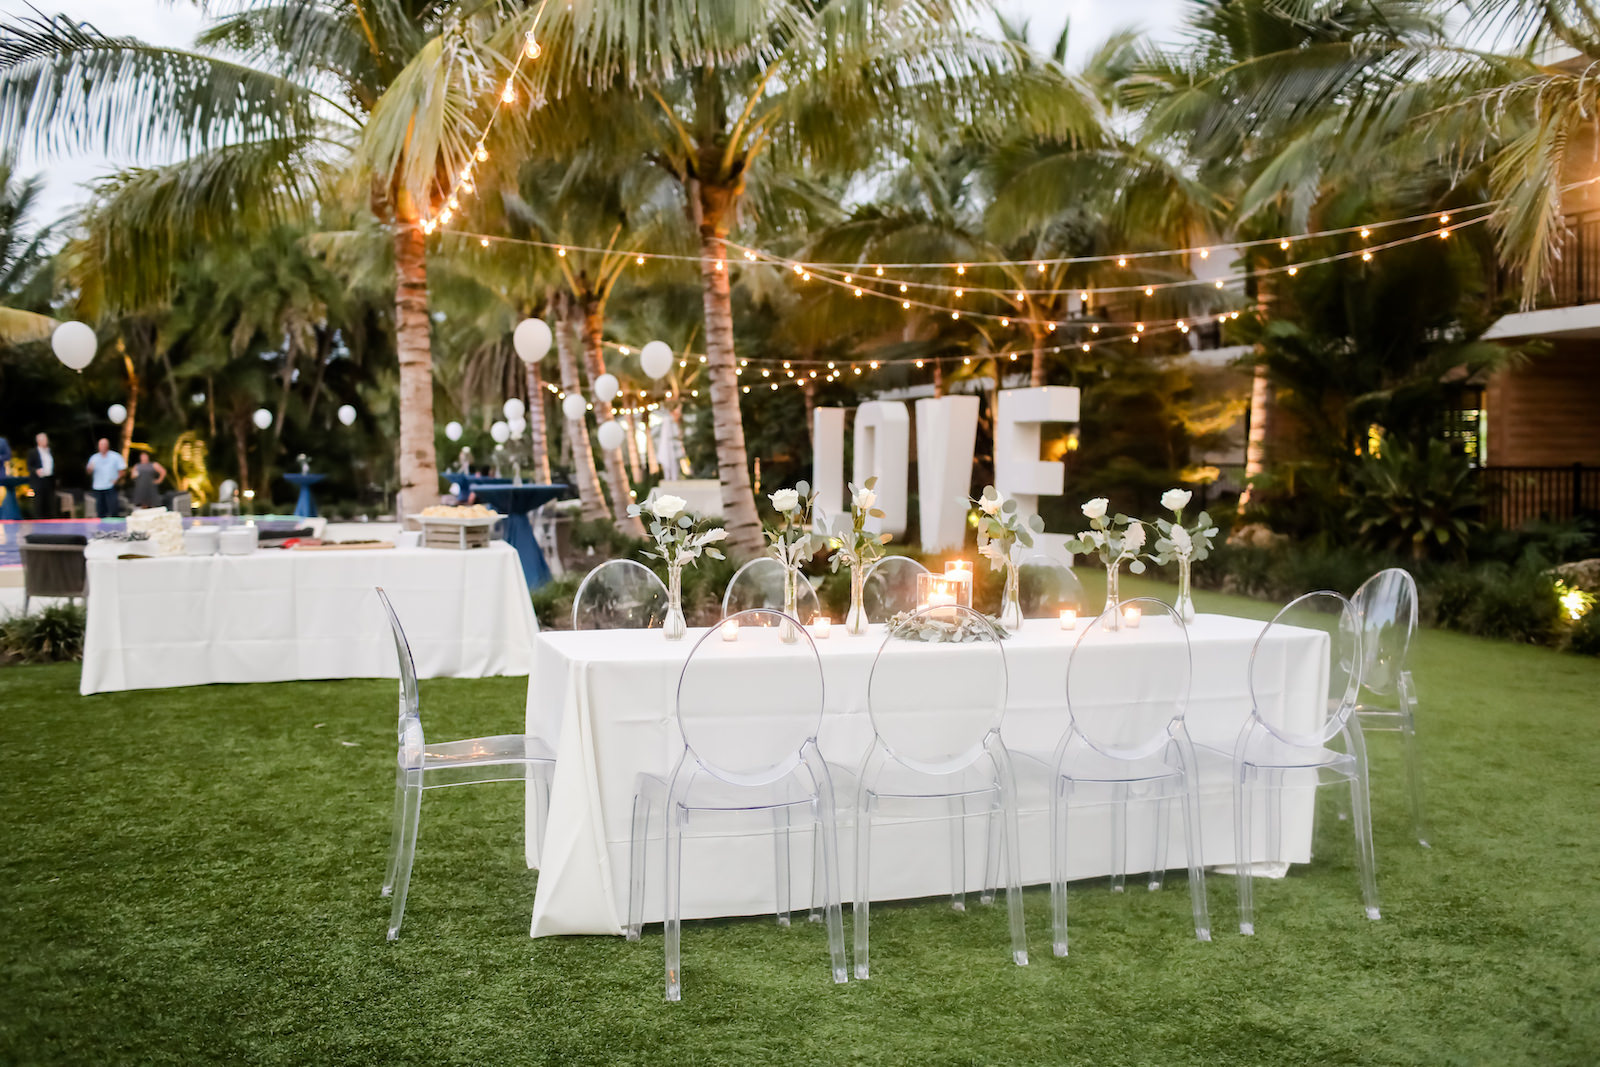 Romantic, Modern Outdoor Florida Wedding Reception at Bali Hai Beachfront Resort Anna Marie Island, Long Feasting Tables, Acrylic Ghost Chair Rentals, Low Floral Centerpieces with Candles, String lighting, Oversized Large LOVE Letters | Sarasota Wedding Planner Kelly Kennedy Weddings | Tampa Bay Wedding Photographer Lifelong Photography Studio